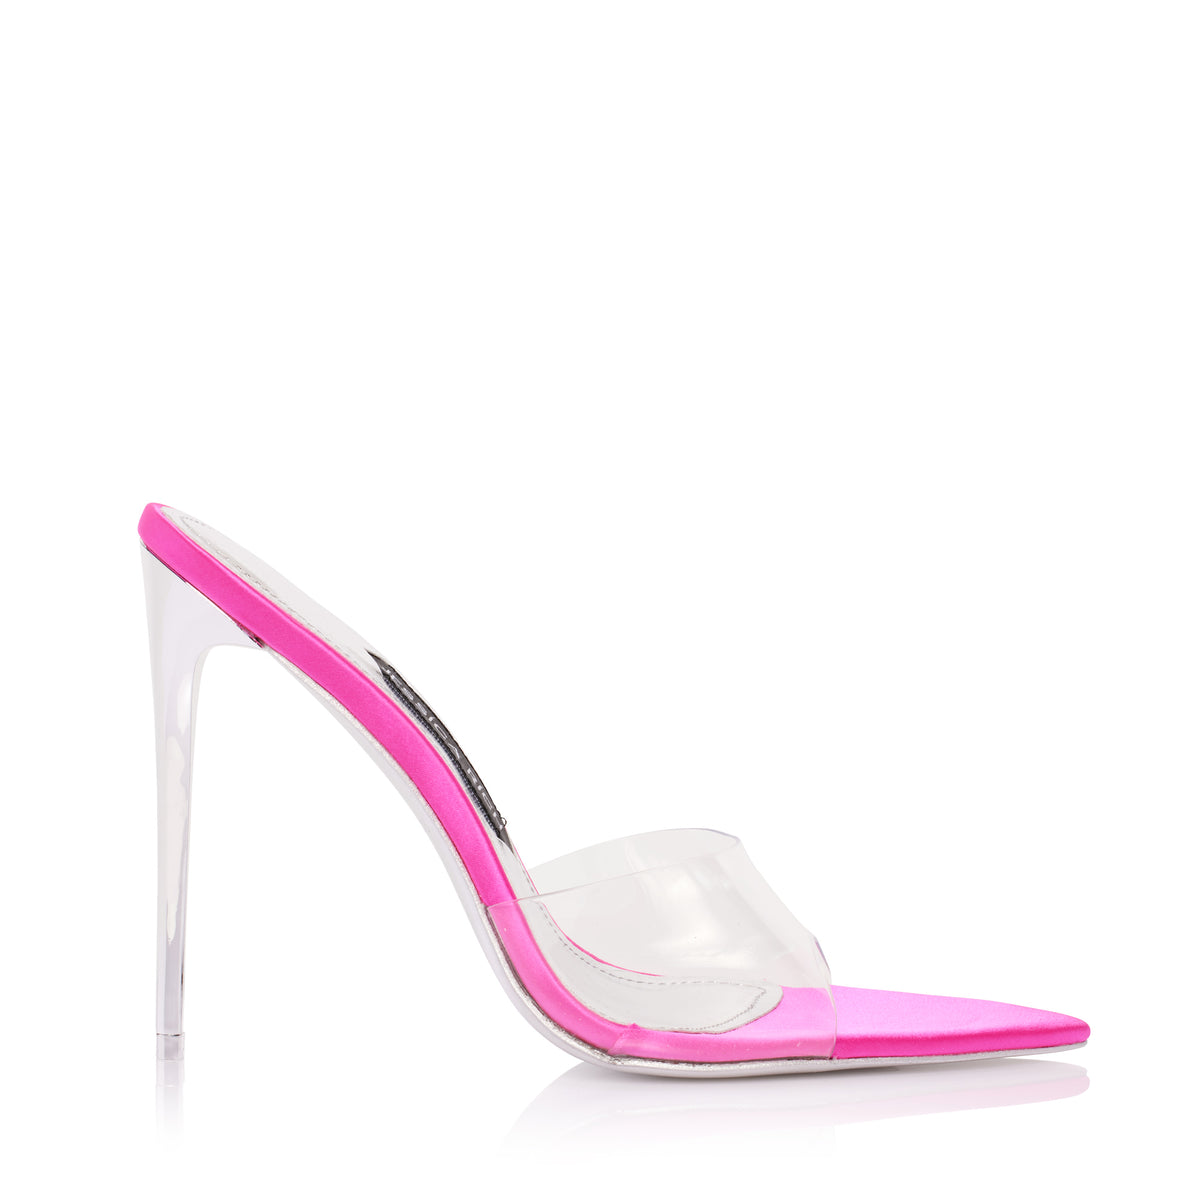 Profile of the pink Racy Mule high heels from luxury women’s shoe brand Jessica Rich.